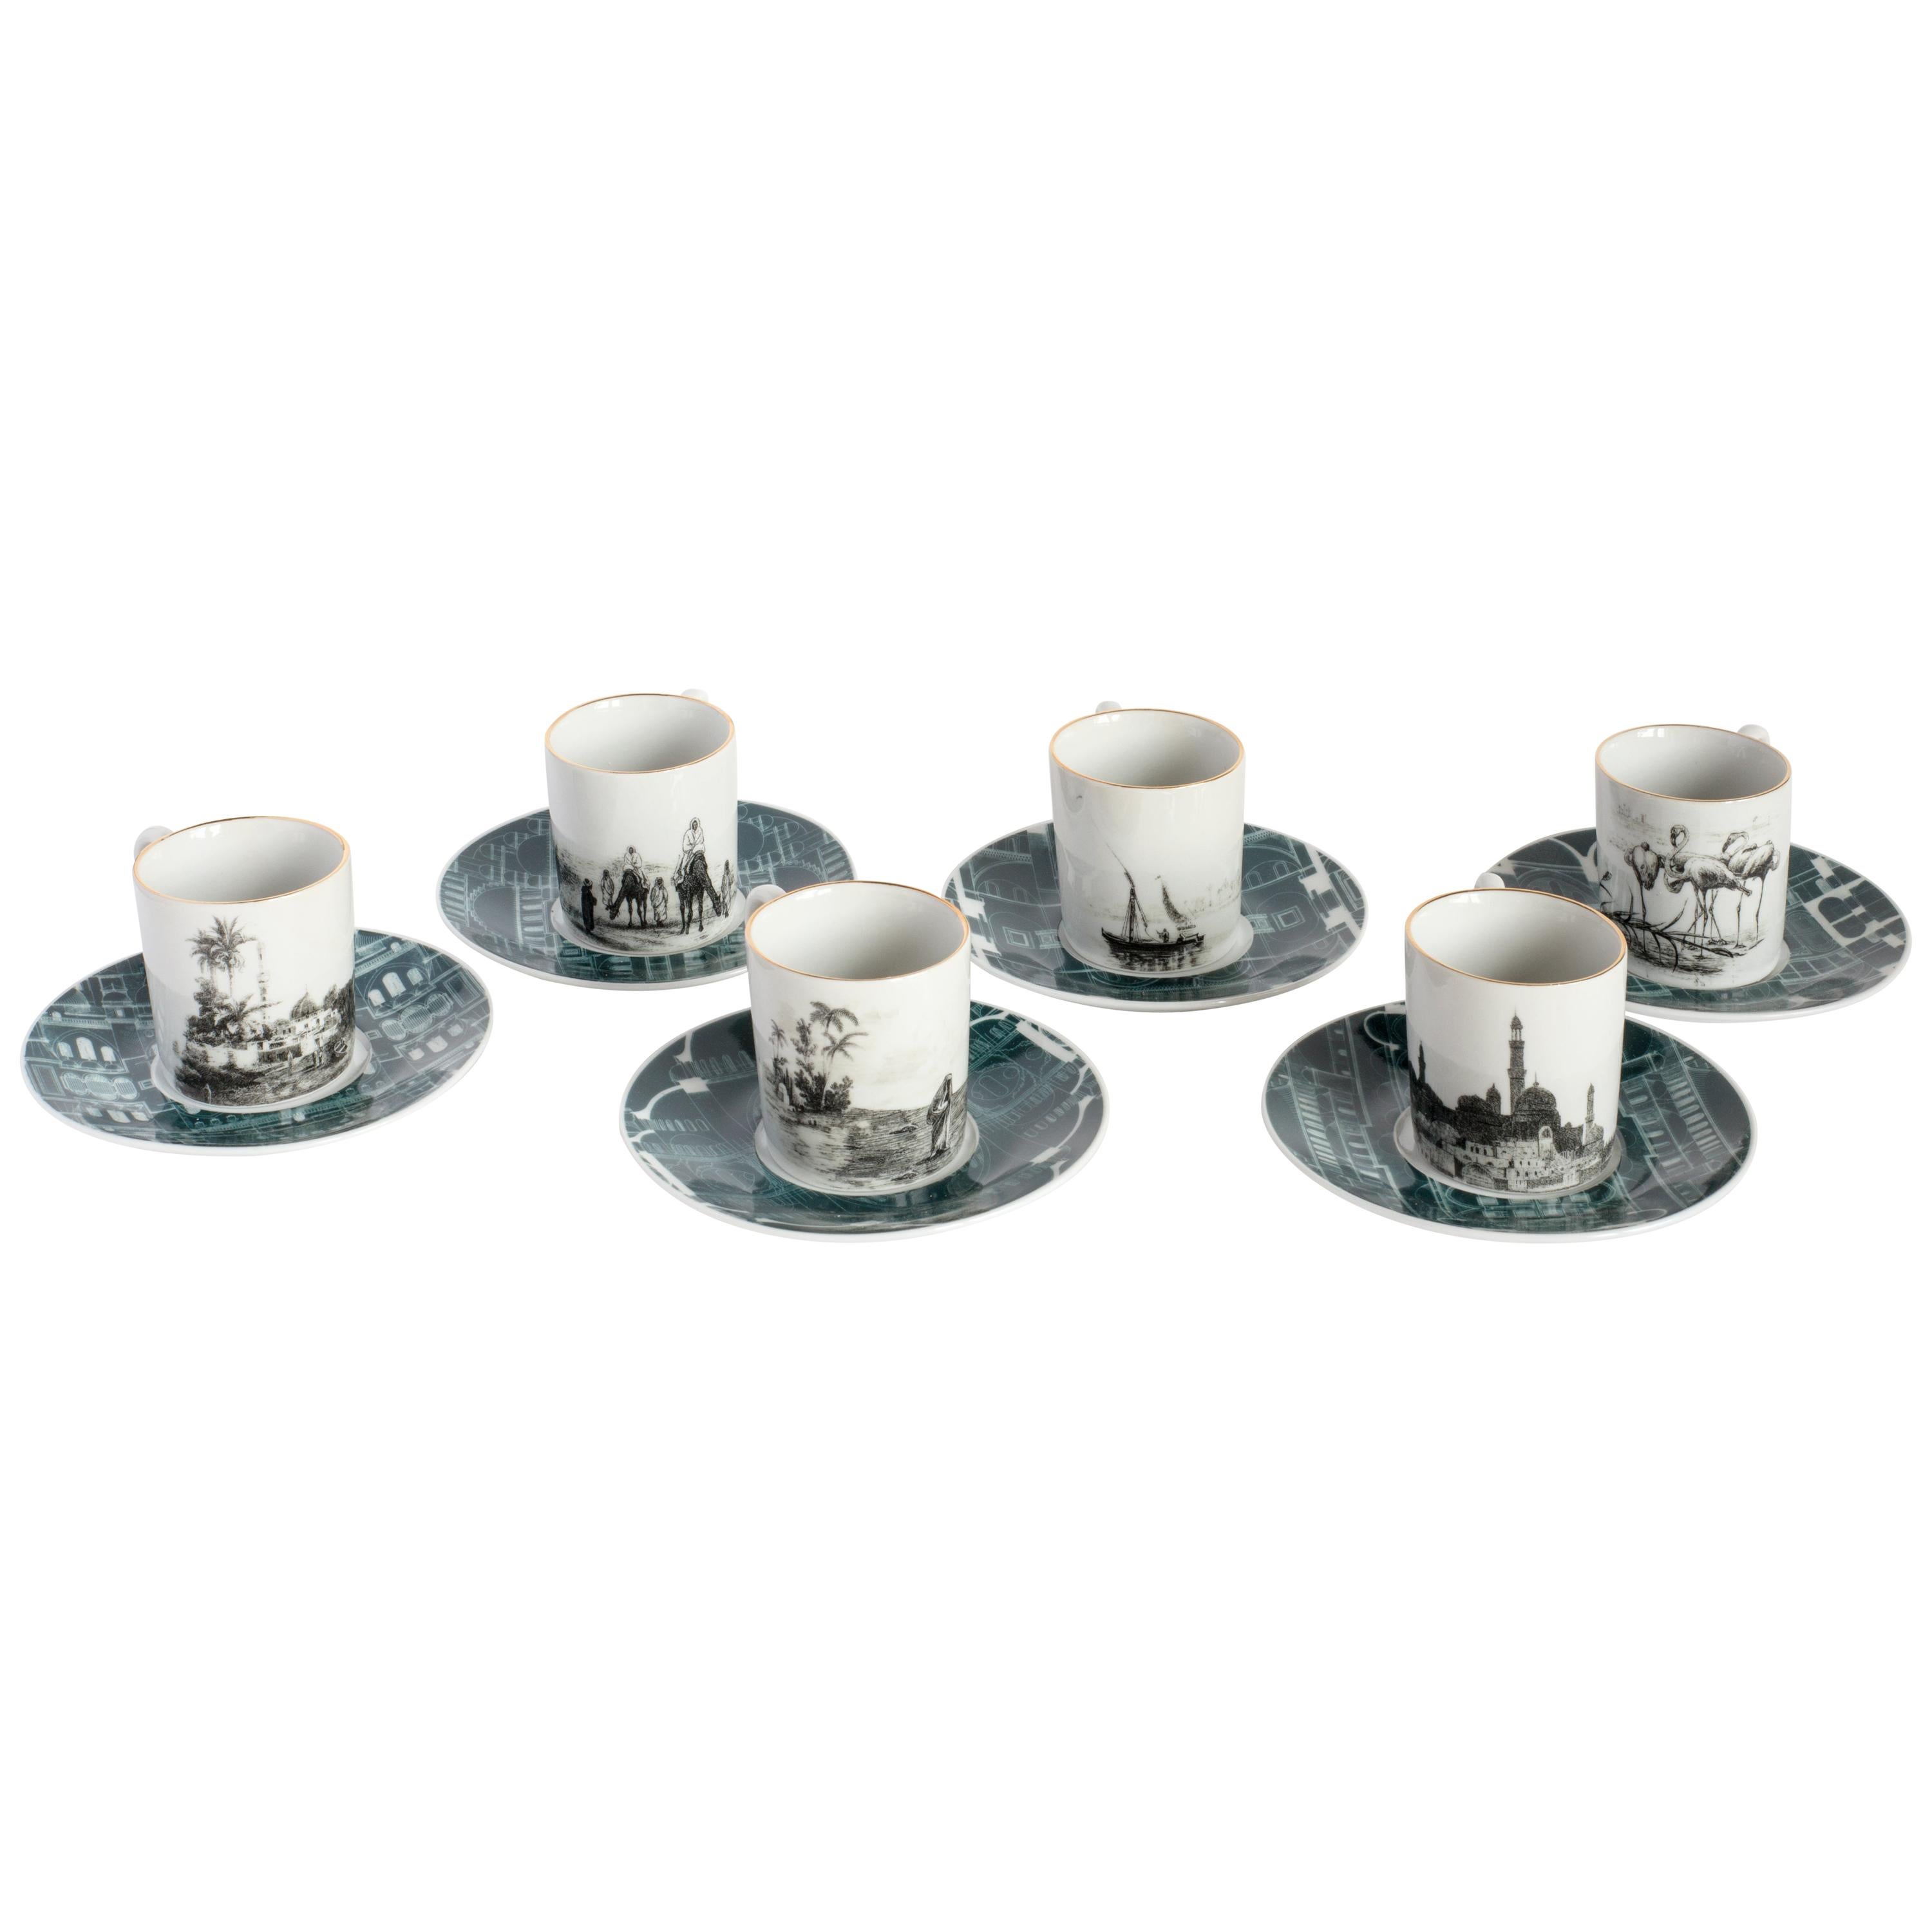 Lebanon, Coffee Set with Six Contemporary Porcelains with Decorative Design For Sale